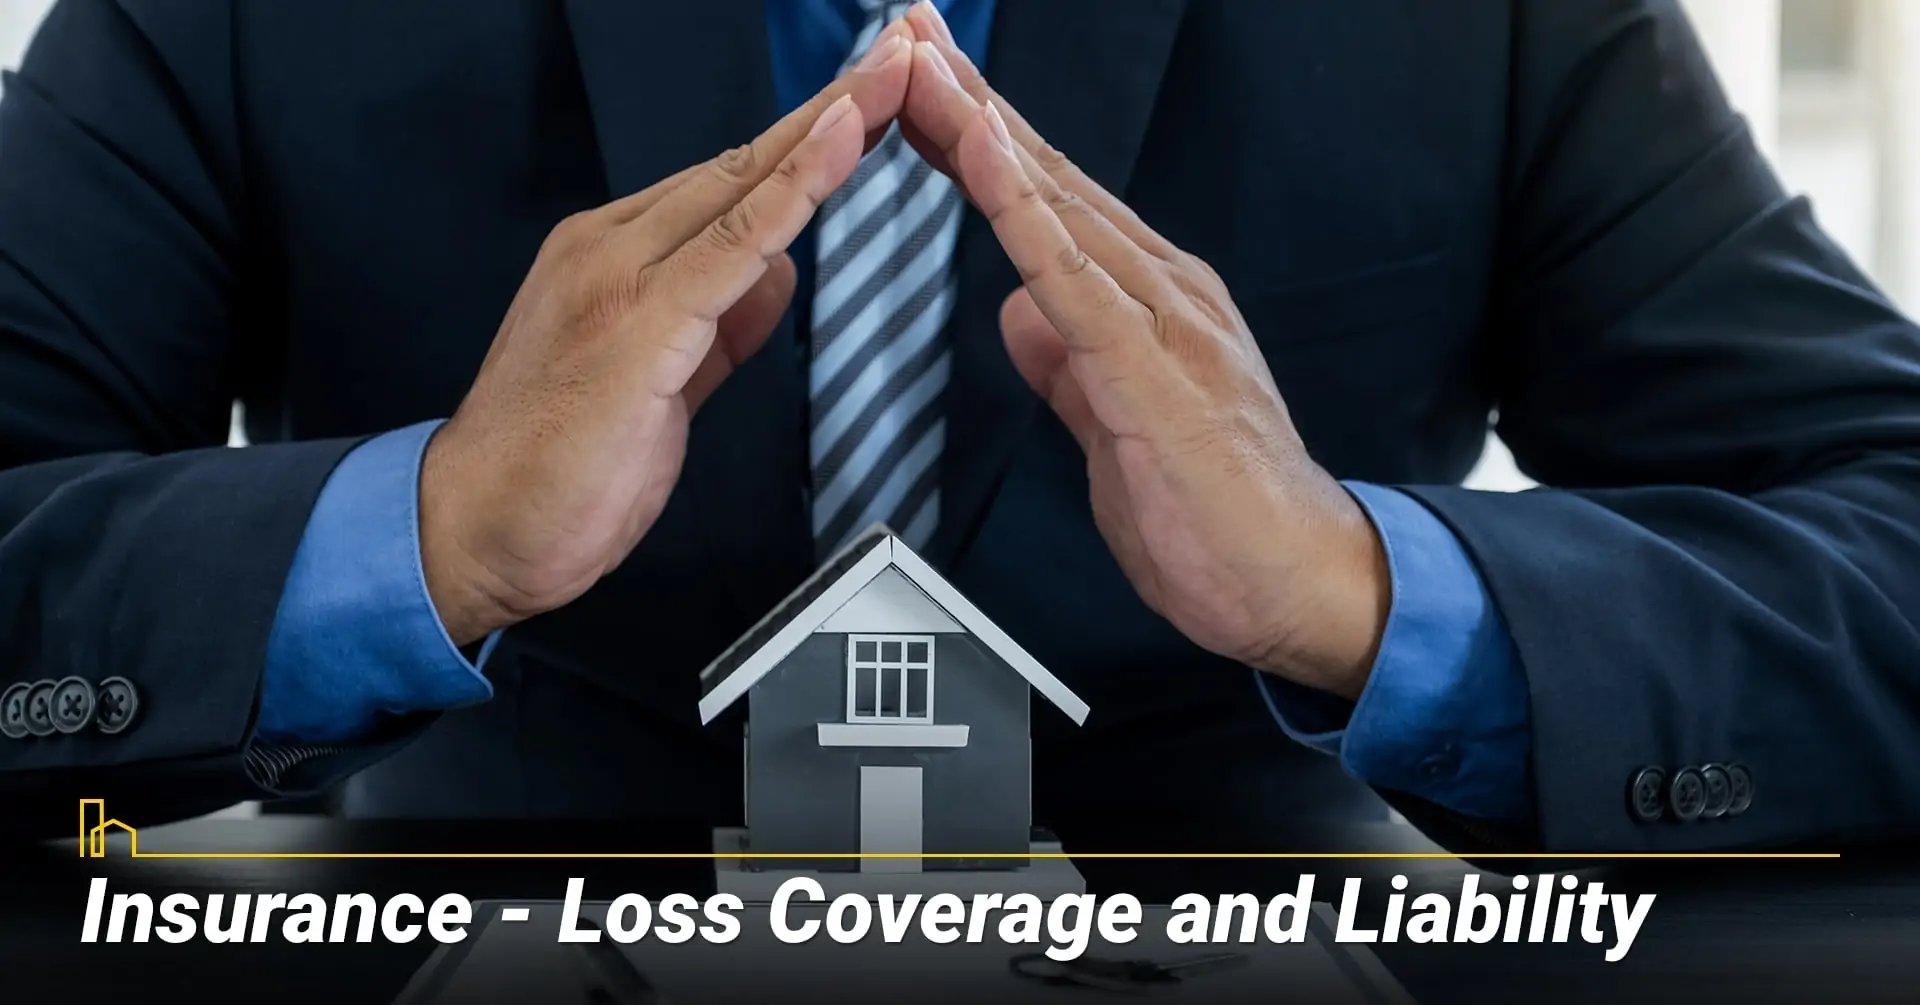 Insurance—Loss Coverage and Liability, protect your home with insurance